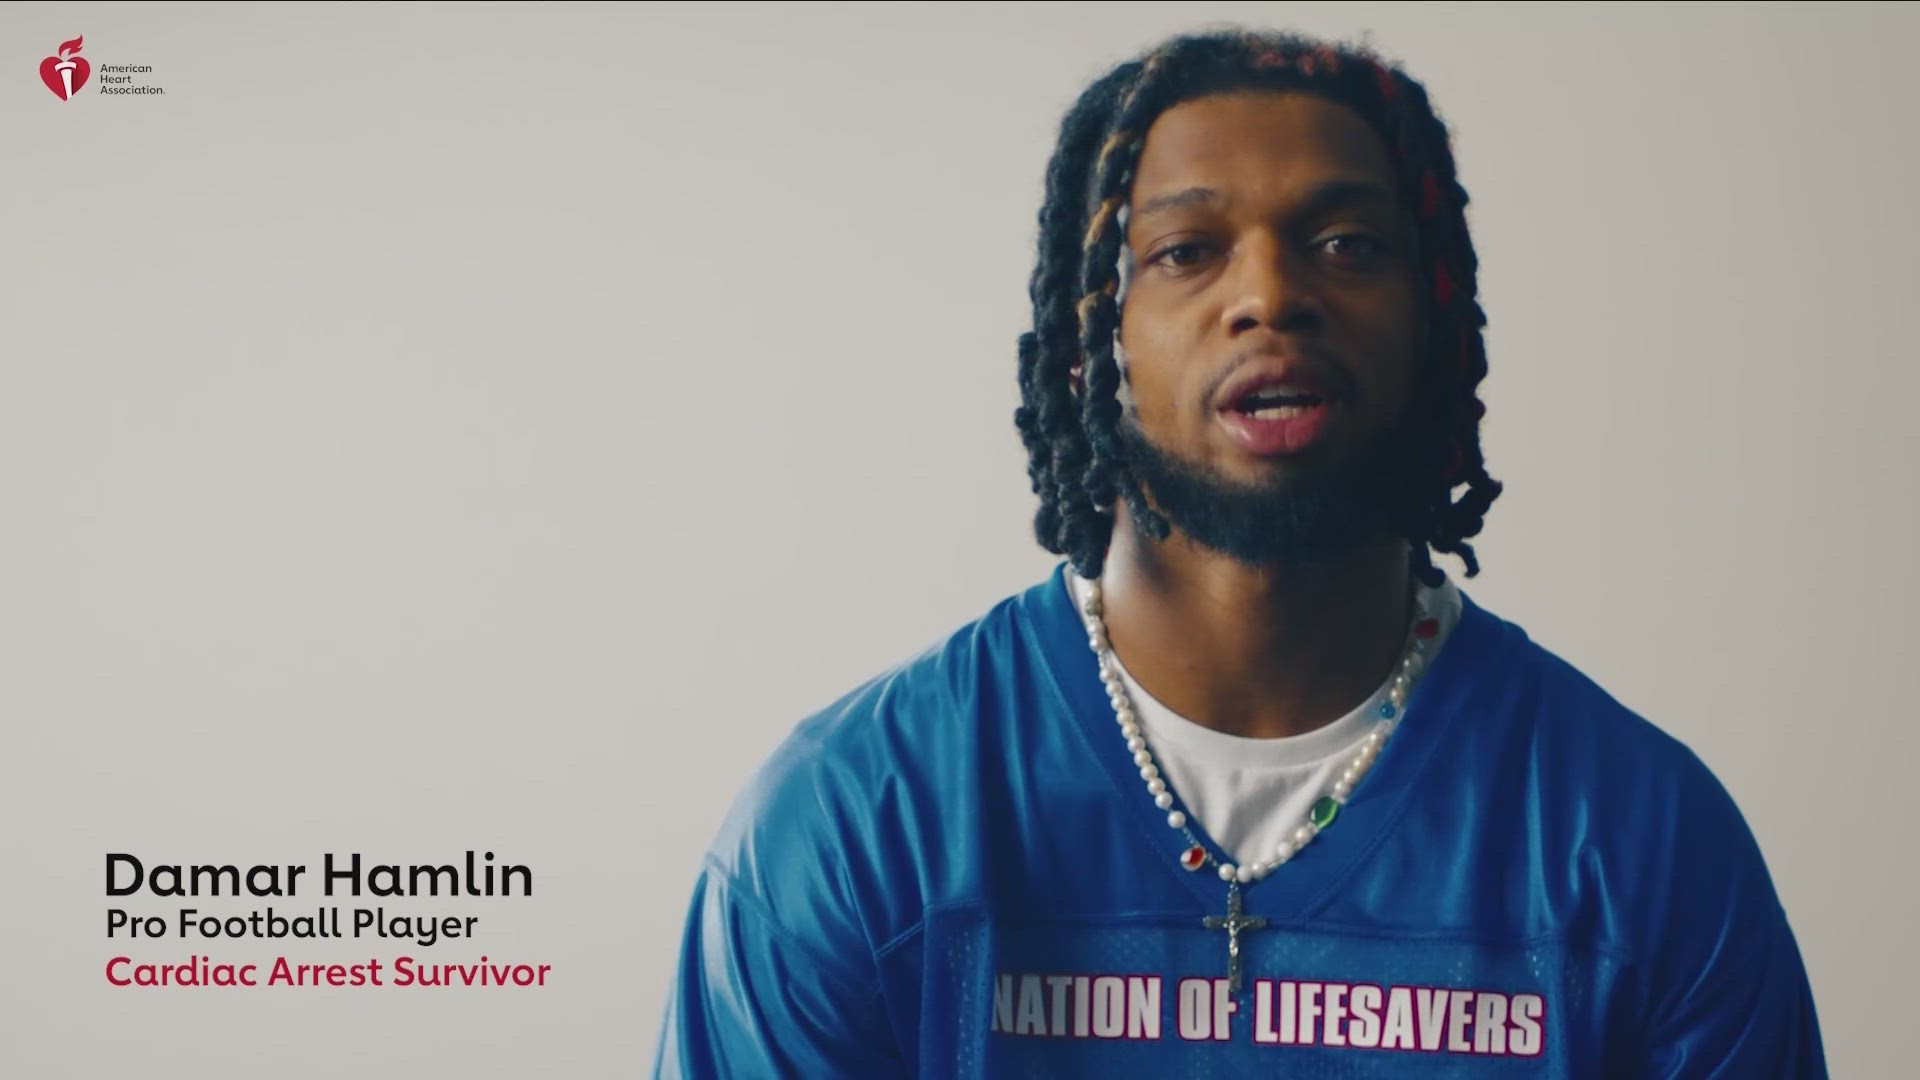 Bills team up with the American Heart Association to help improve the survival of cardiac arrest